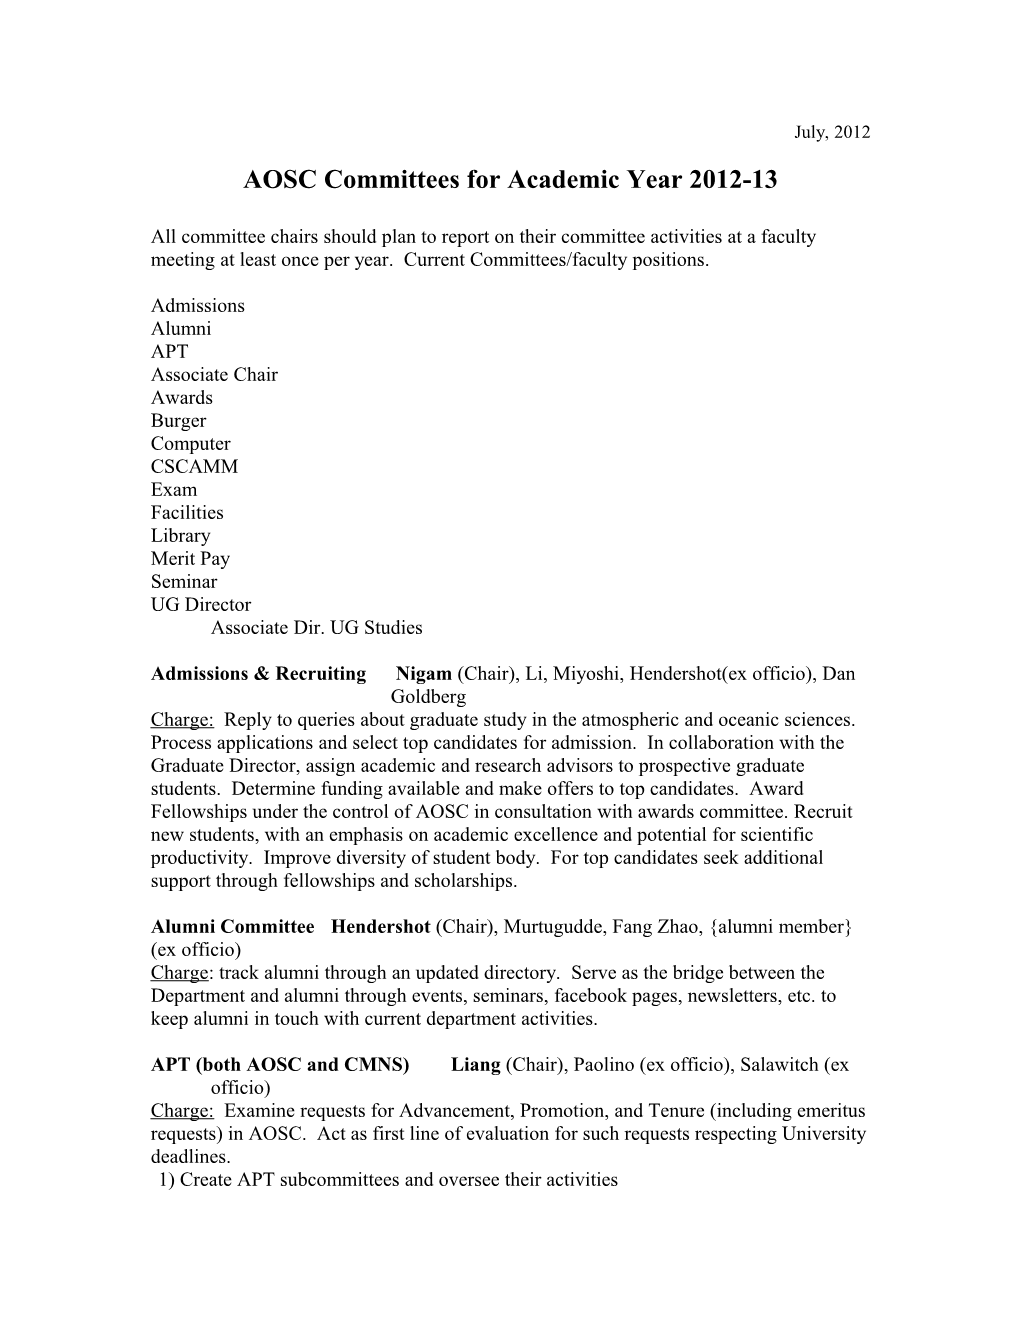 AOSC Committees Academic Year 2006